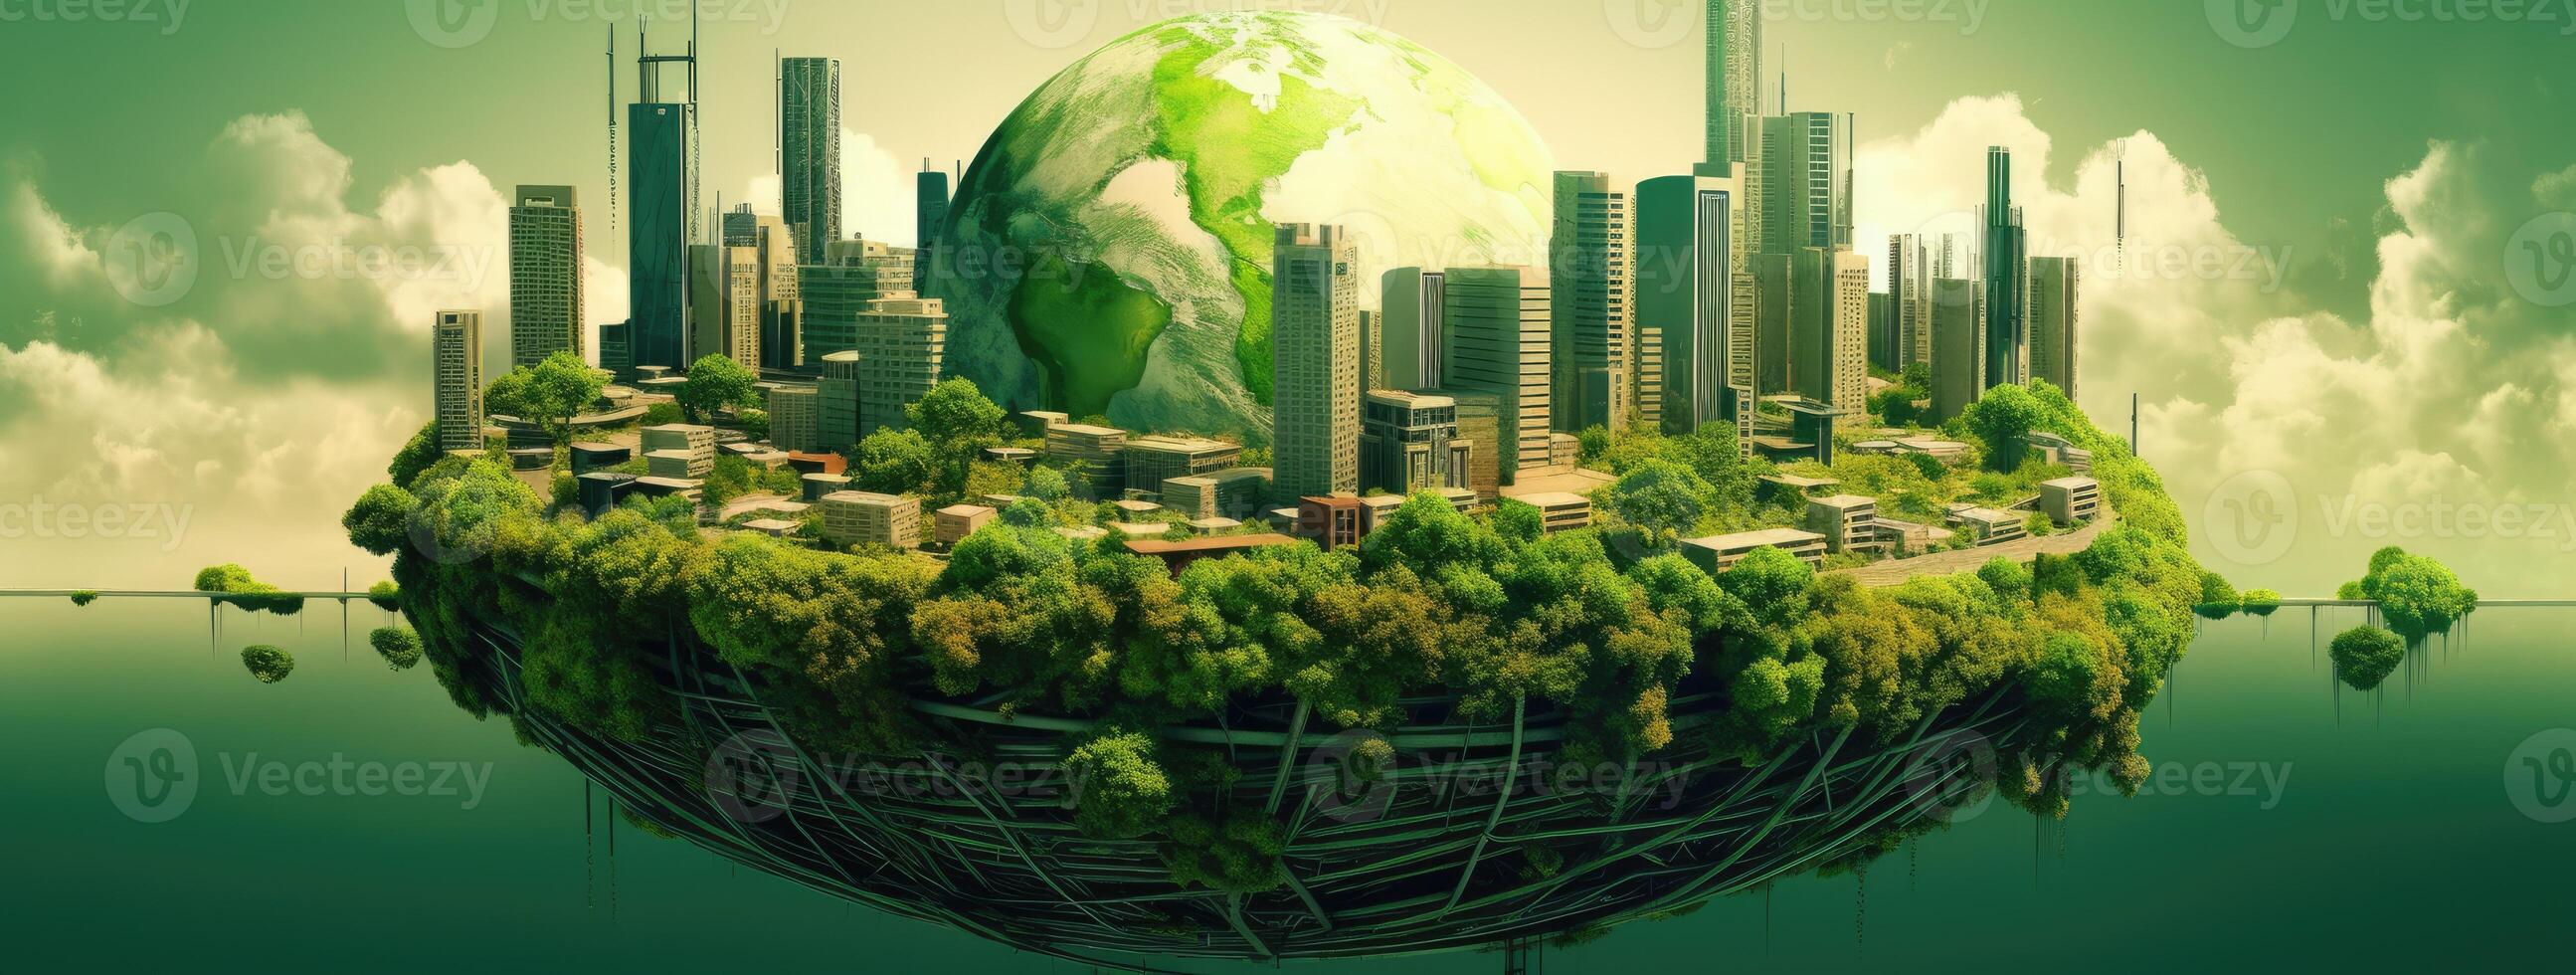 Green Earth with City, Trees and Natural Resources, Innovating Techniques, Industrial Chic, Timber Frame Construction, Creative Commons Attribution. photo